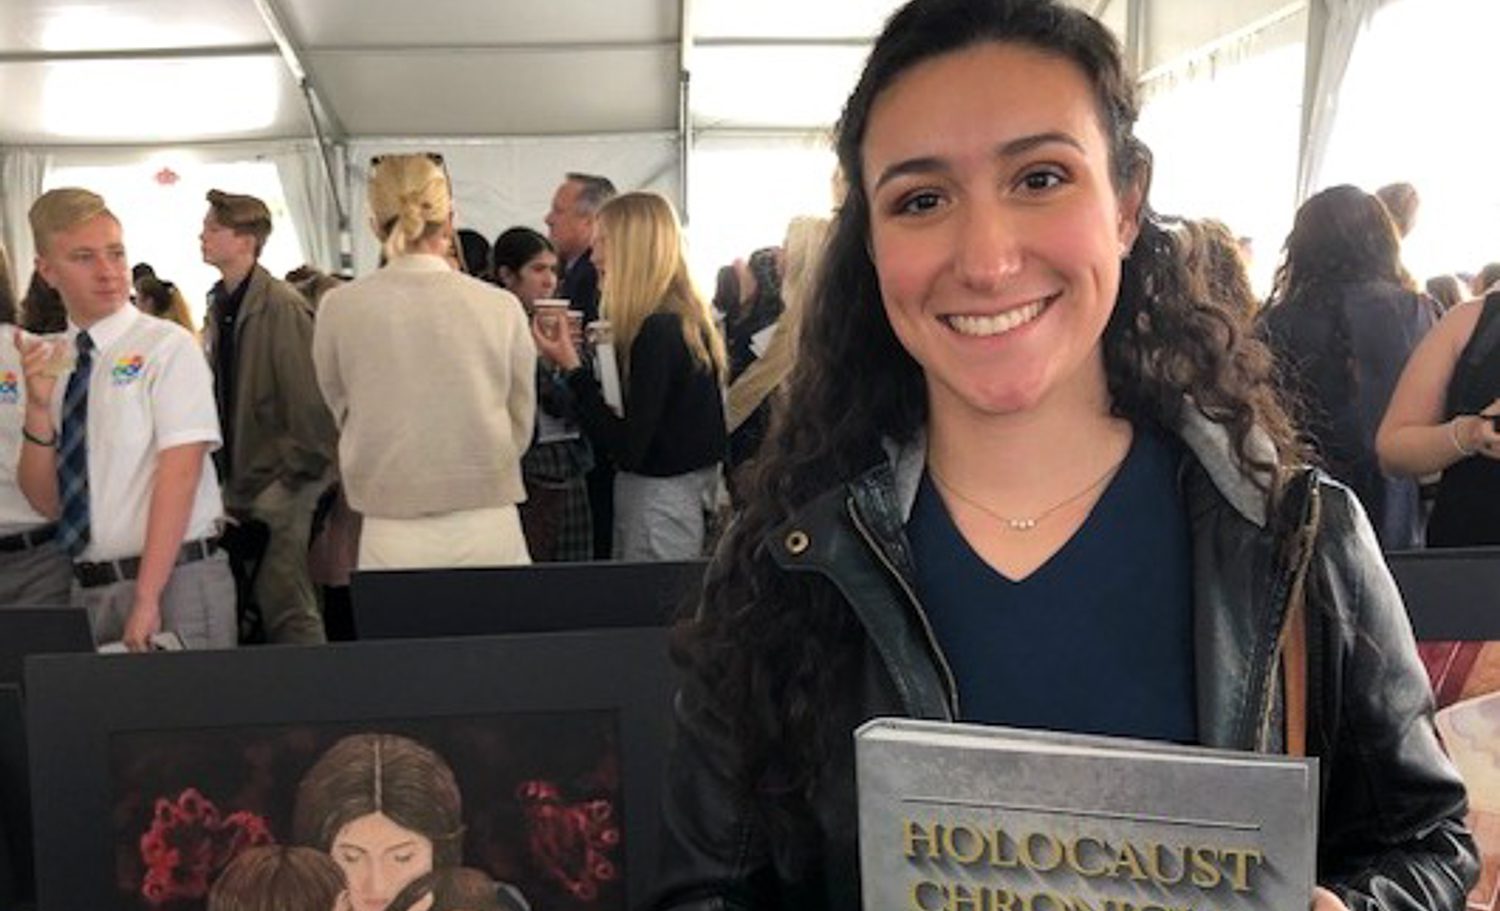 Esperanza High School senior, Gabriela Schrader, is a finalist in the 20th Annual Holocaust Art and Writing Contest by Chapman University! After thousands of entries from over 20 countries, Gabriela was one of only 9 artists worldwide selected as a finalist. Her piece is entitled “Love’s Power.”